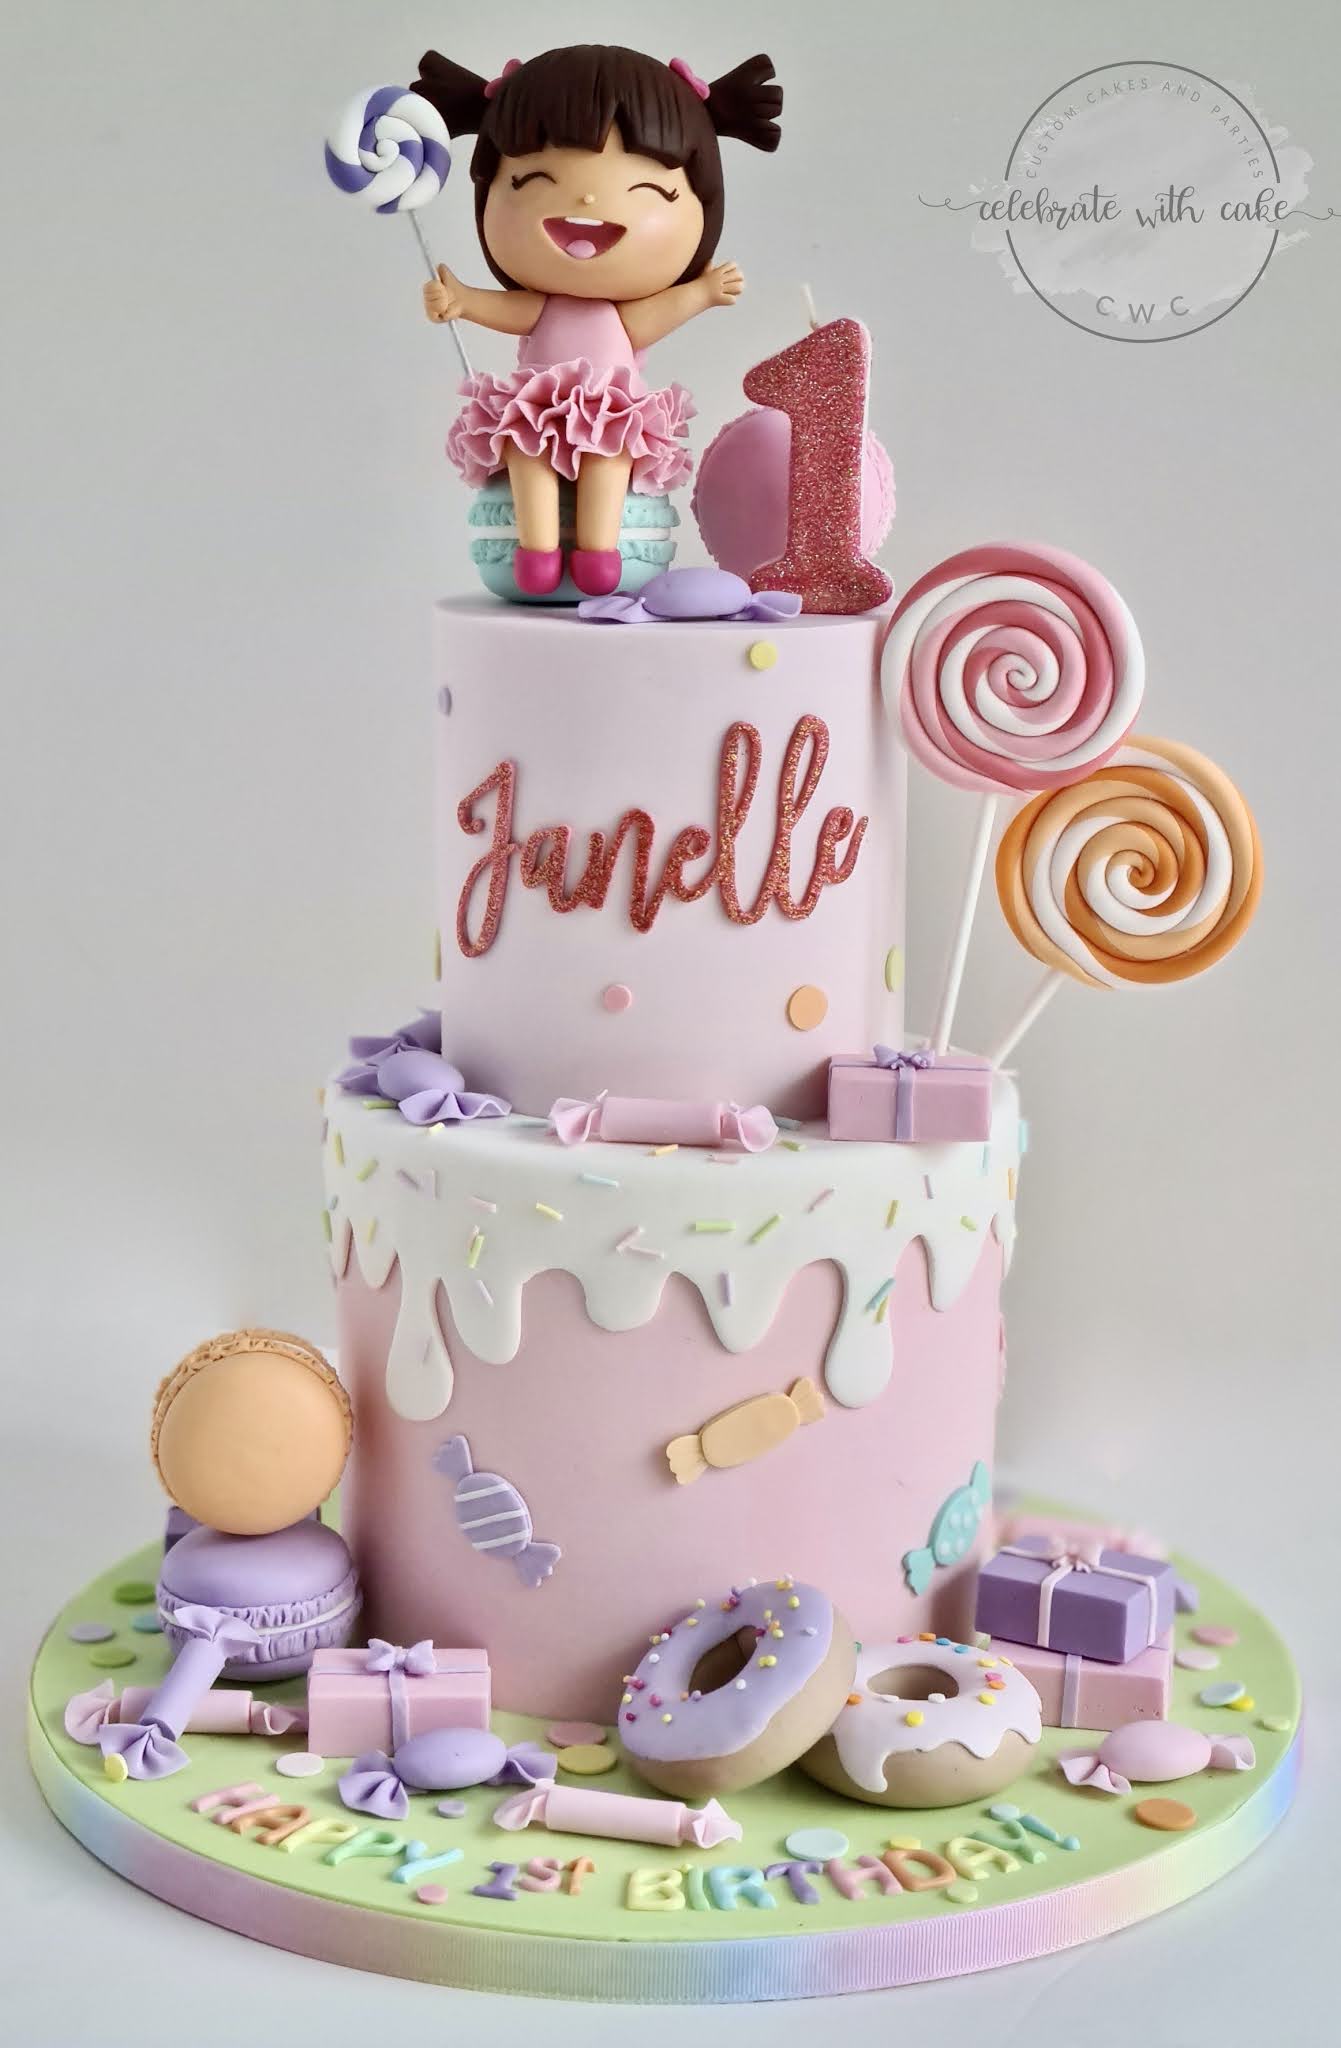 Celebrate With Cake!: Girl In Candyland 1St Birthday Two Tier Cake